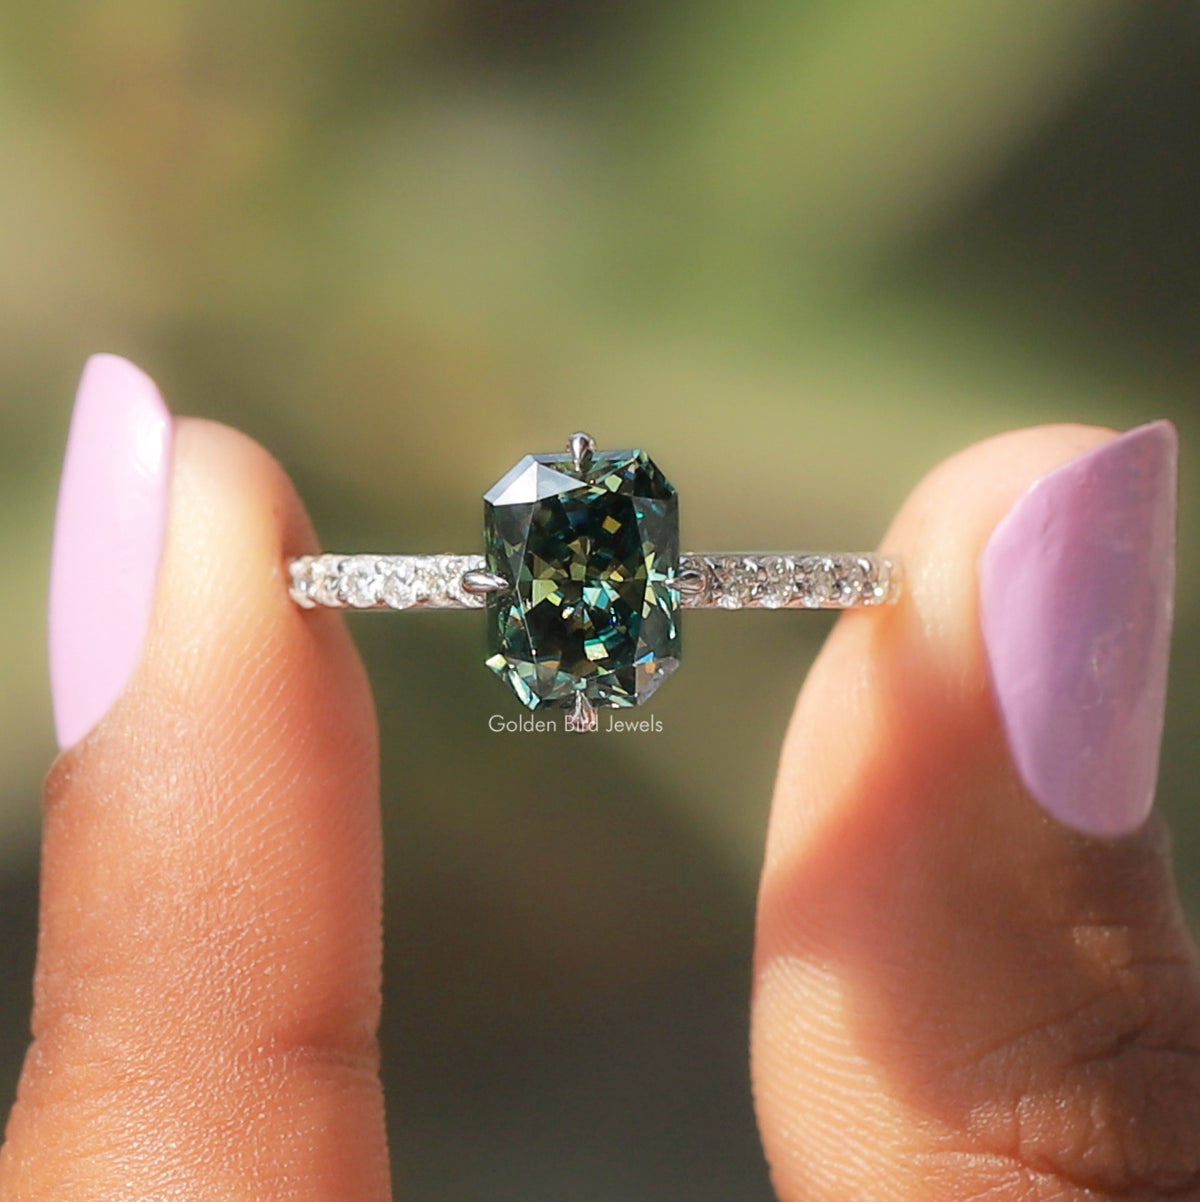 [In two finger front view of green radiant cut accent stone moissanite ring]-[Golden Bird Jewels]